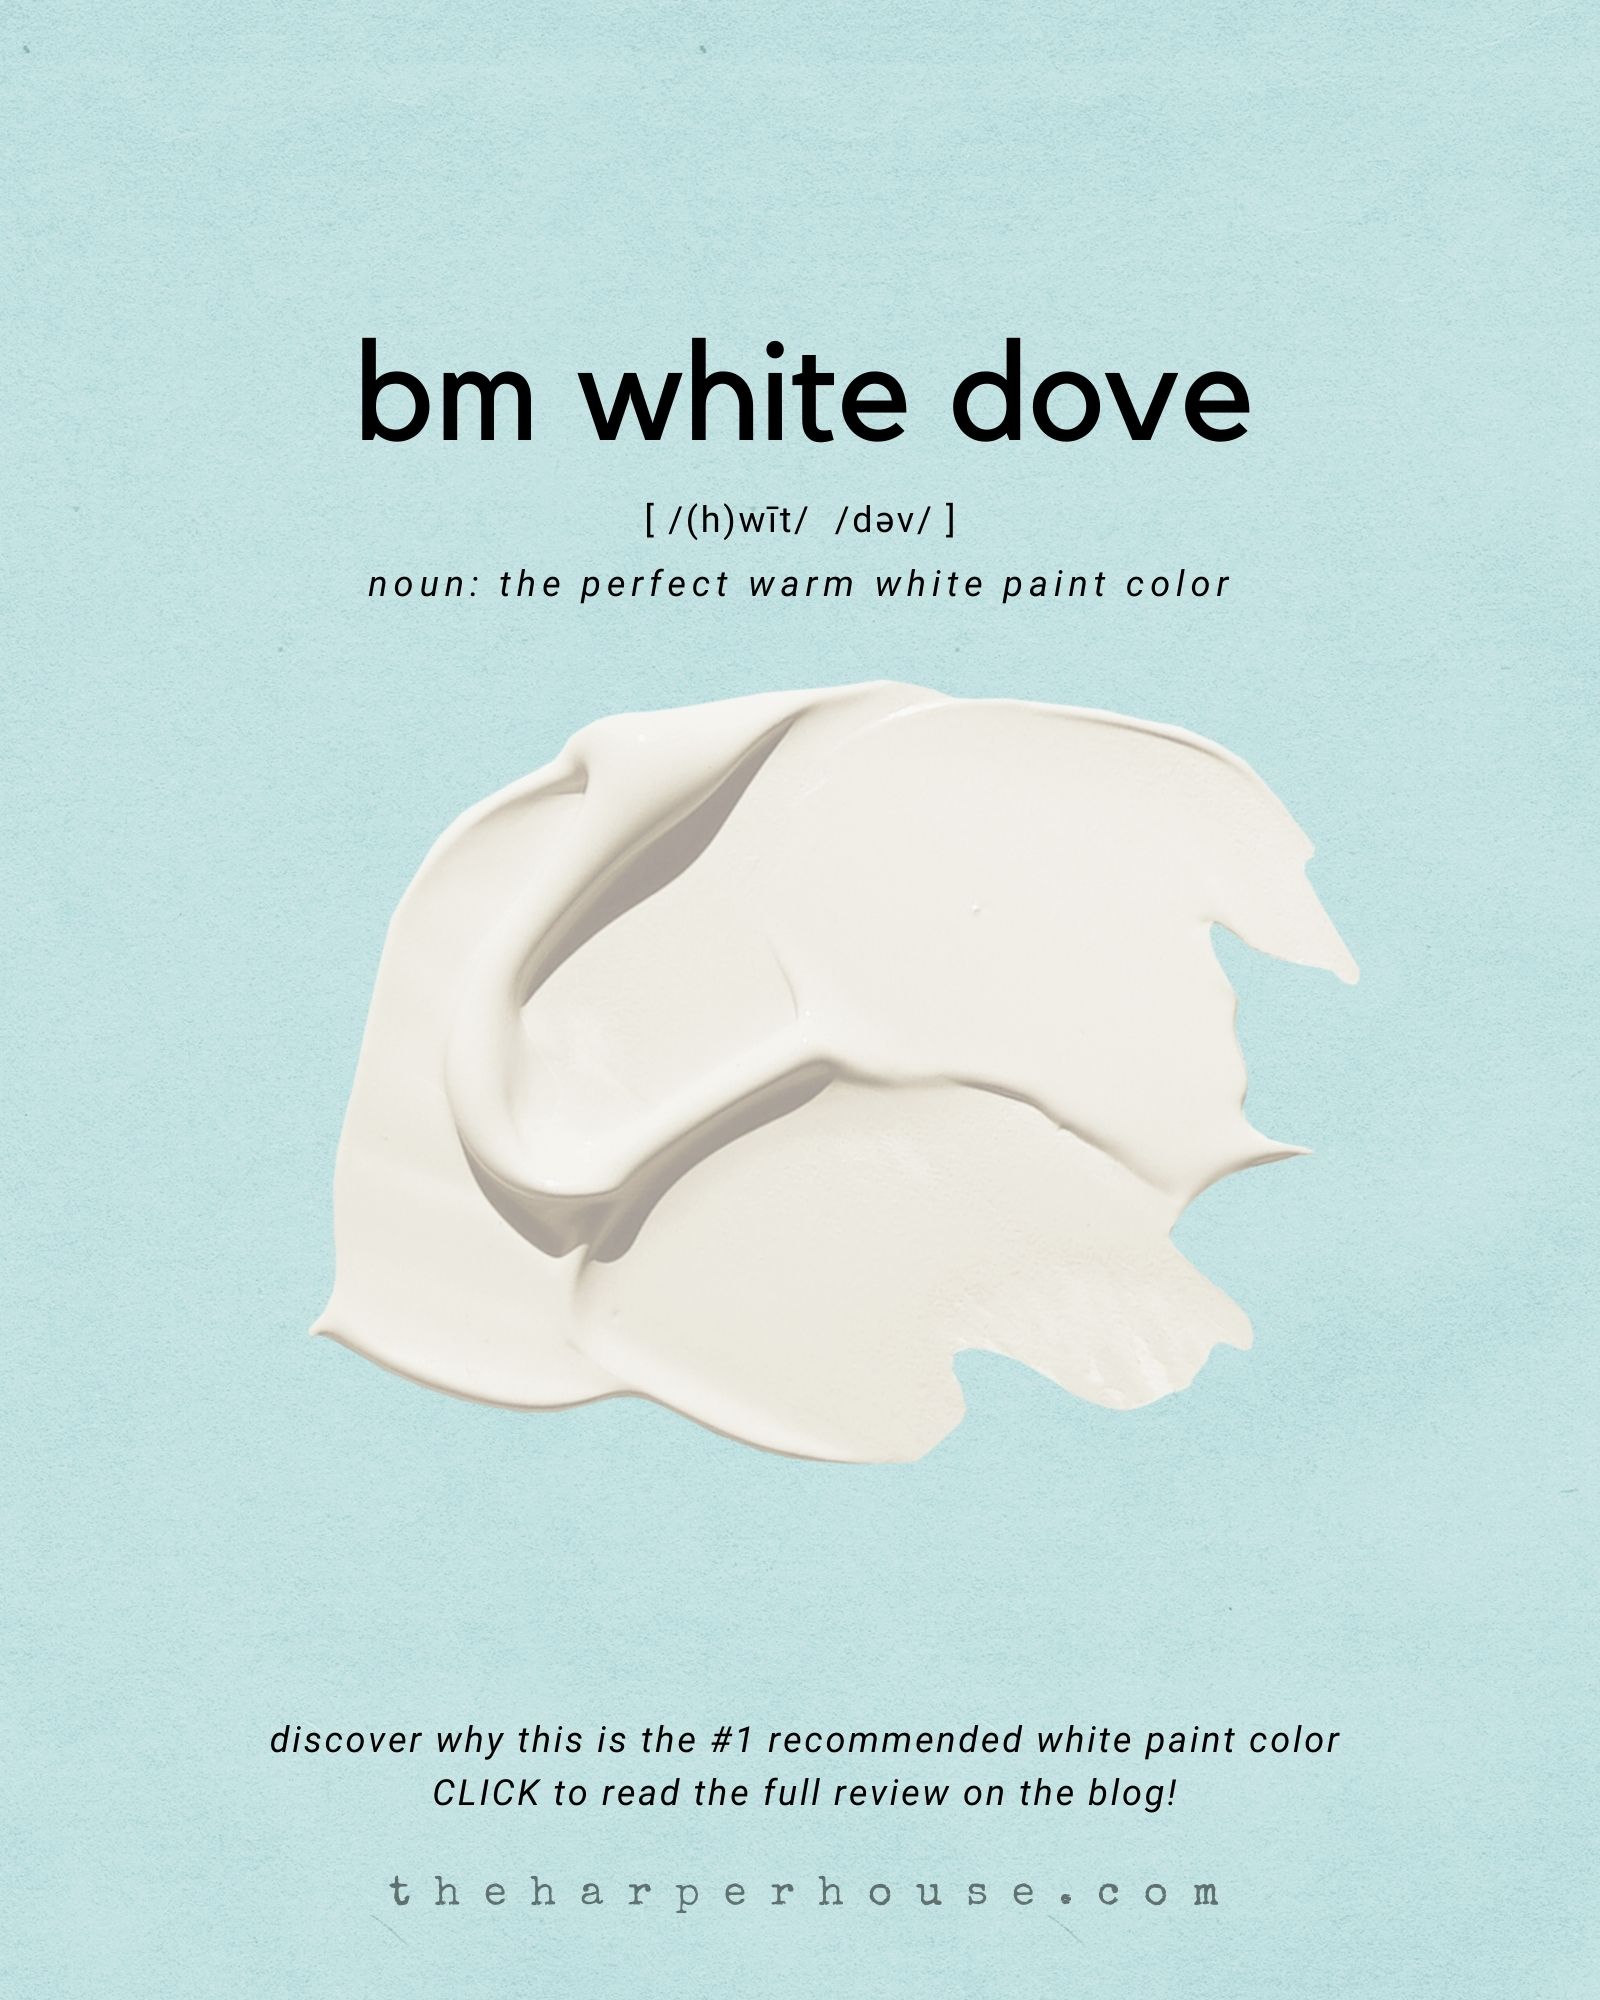 Simply White by Benjamin Moore - The Best White Paint Color - So